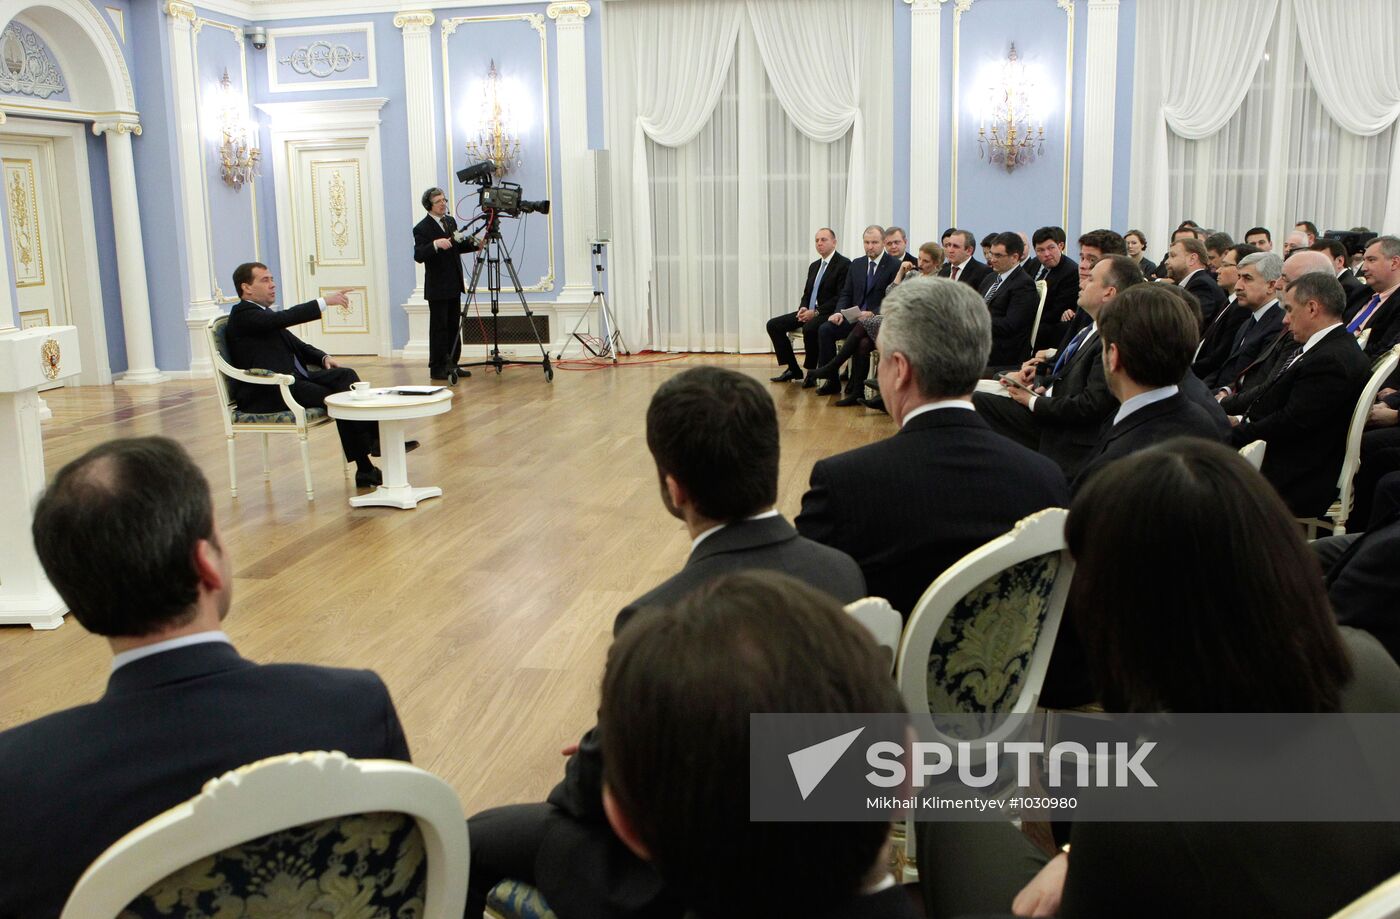 Dmitry Medvedev meets with Public Committee of Supporters